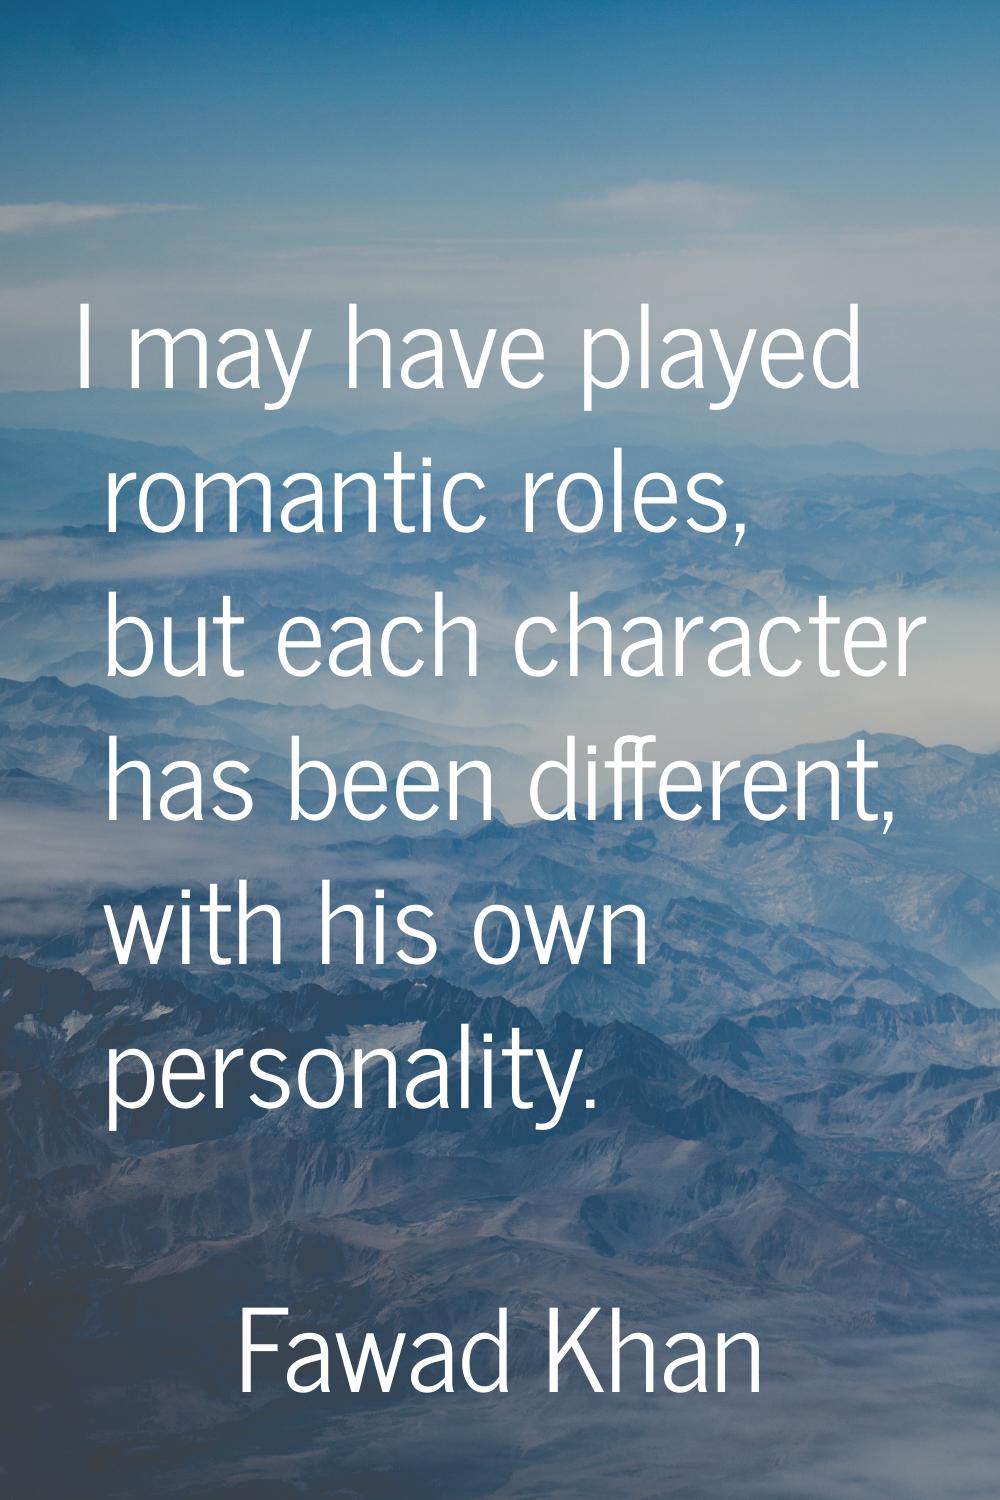 I may have played romantic roles, but each character has been different, with his own personality.